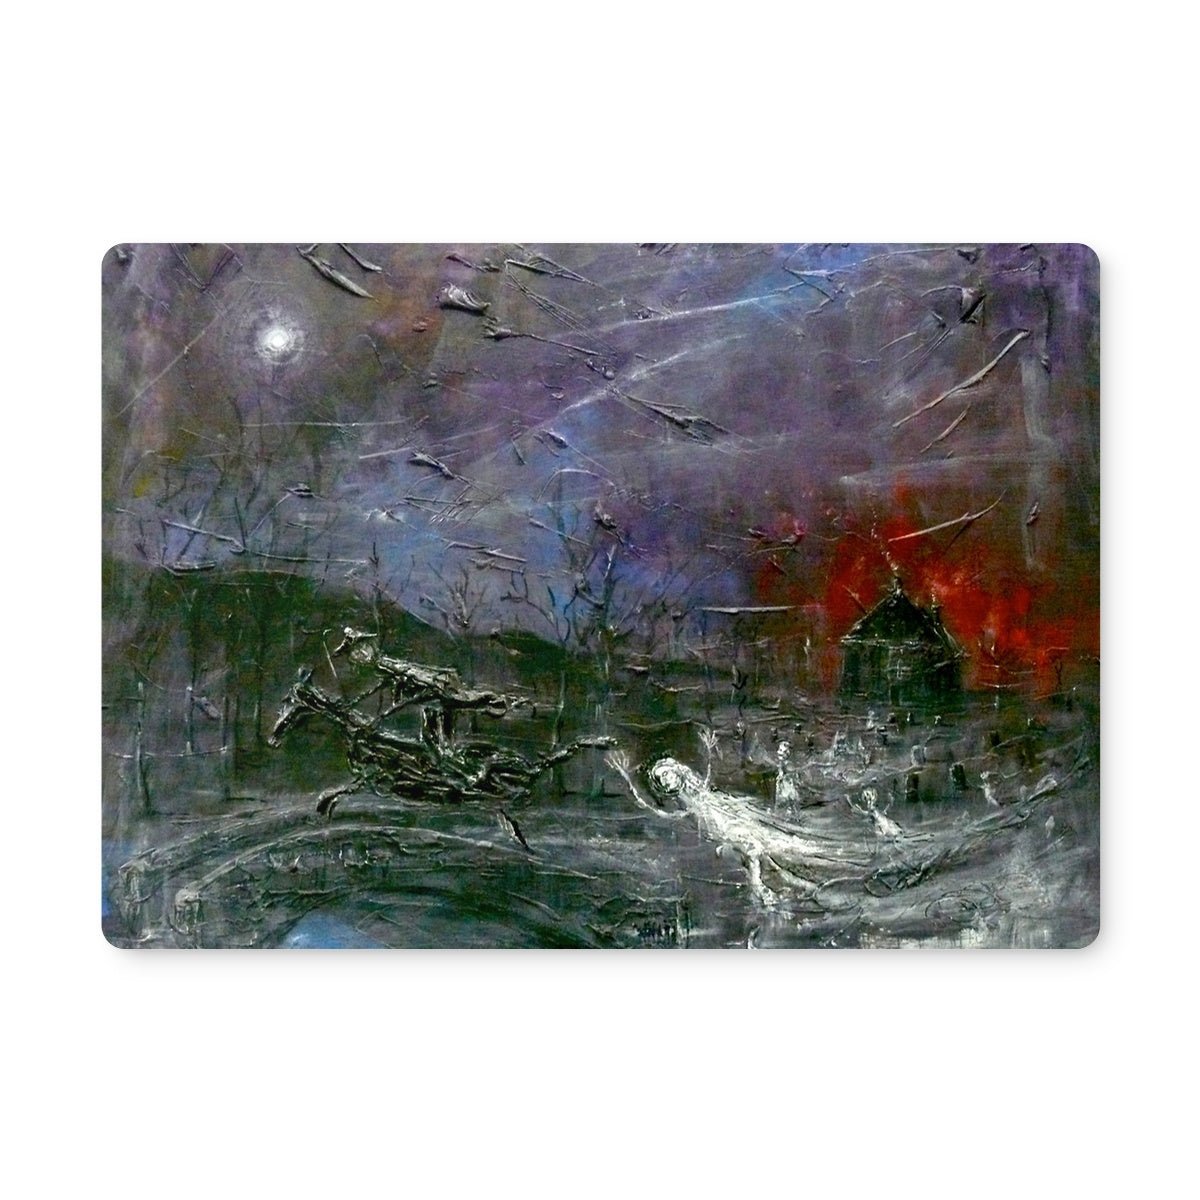 Tam O Shanter Art Gifts Placemat-Placemats-Abstract & Impressionistic Art Gallery-Single Placemat-Paintings, Prints, Homeware, Art Gifts From Scotland By Scottish Artist Kevin Hunter